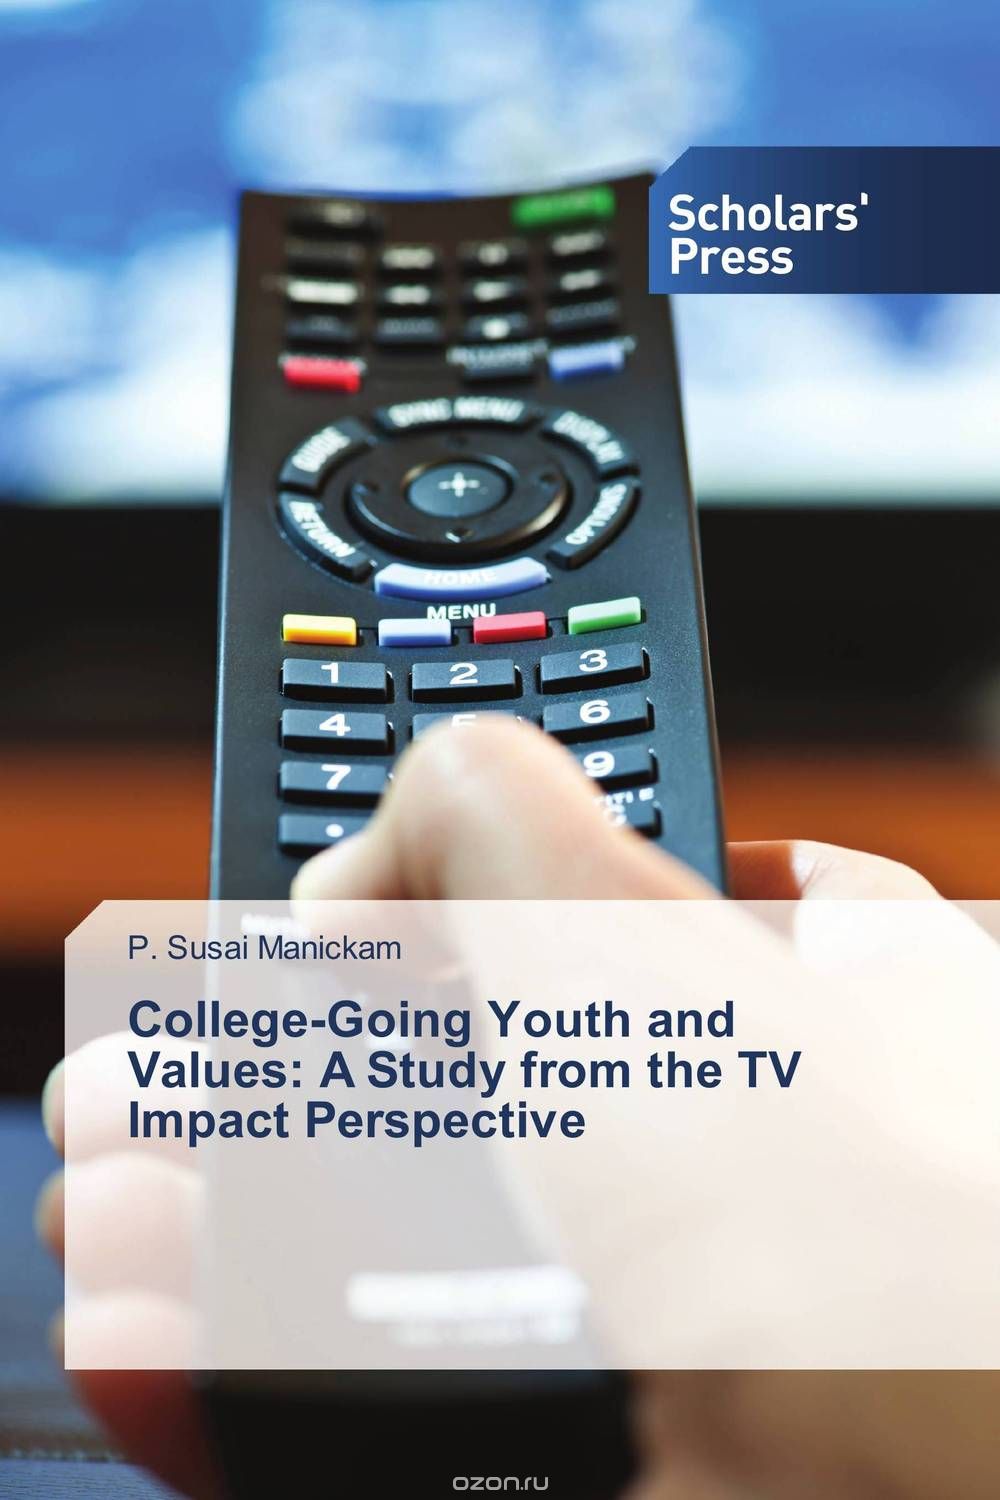 College-Going Youth and Values: A Study from the TV Impact Perspective